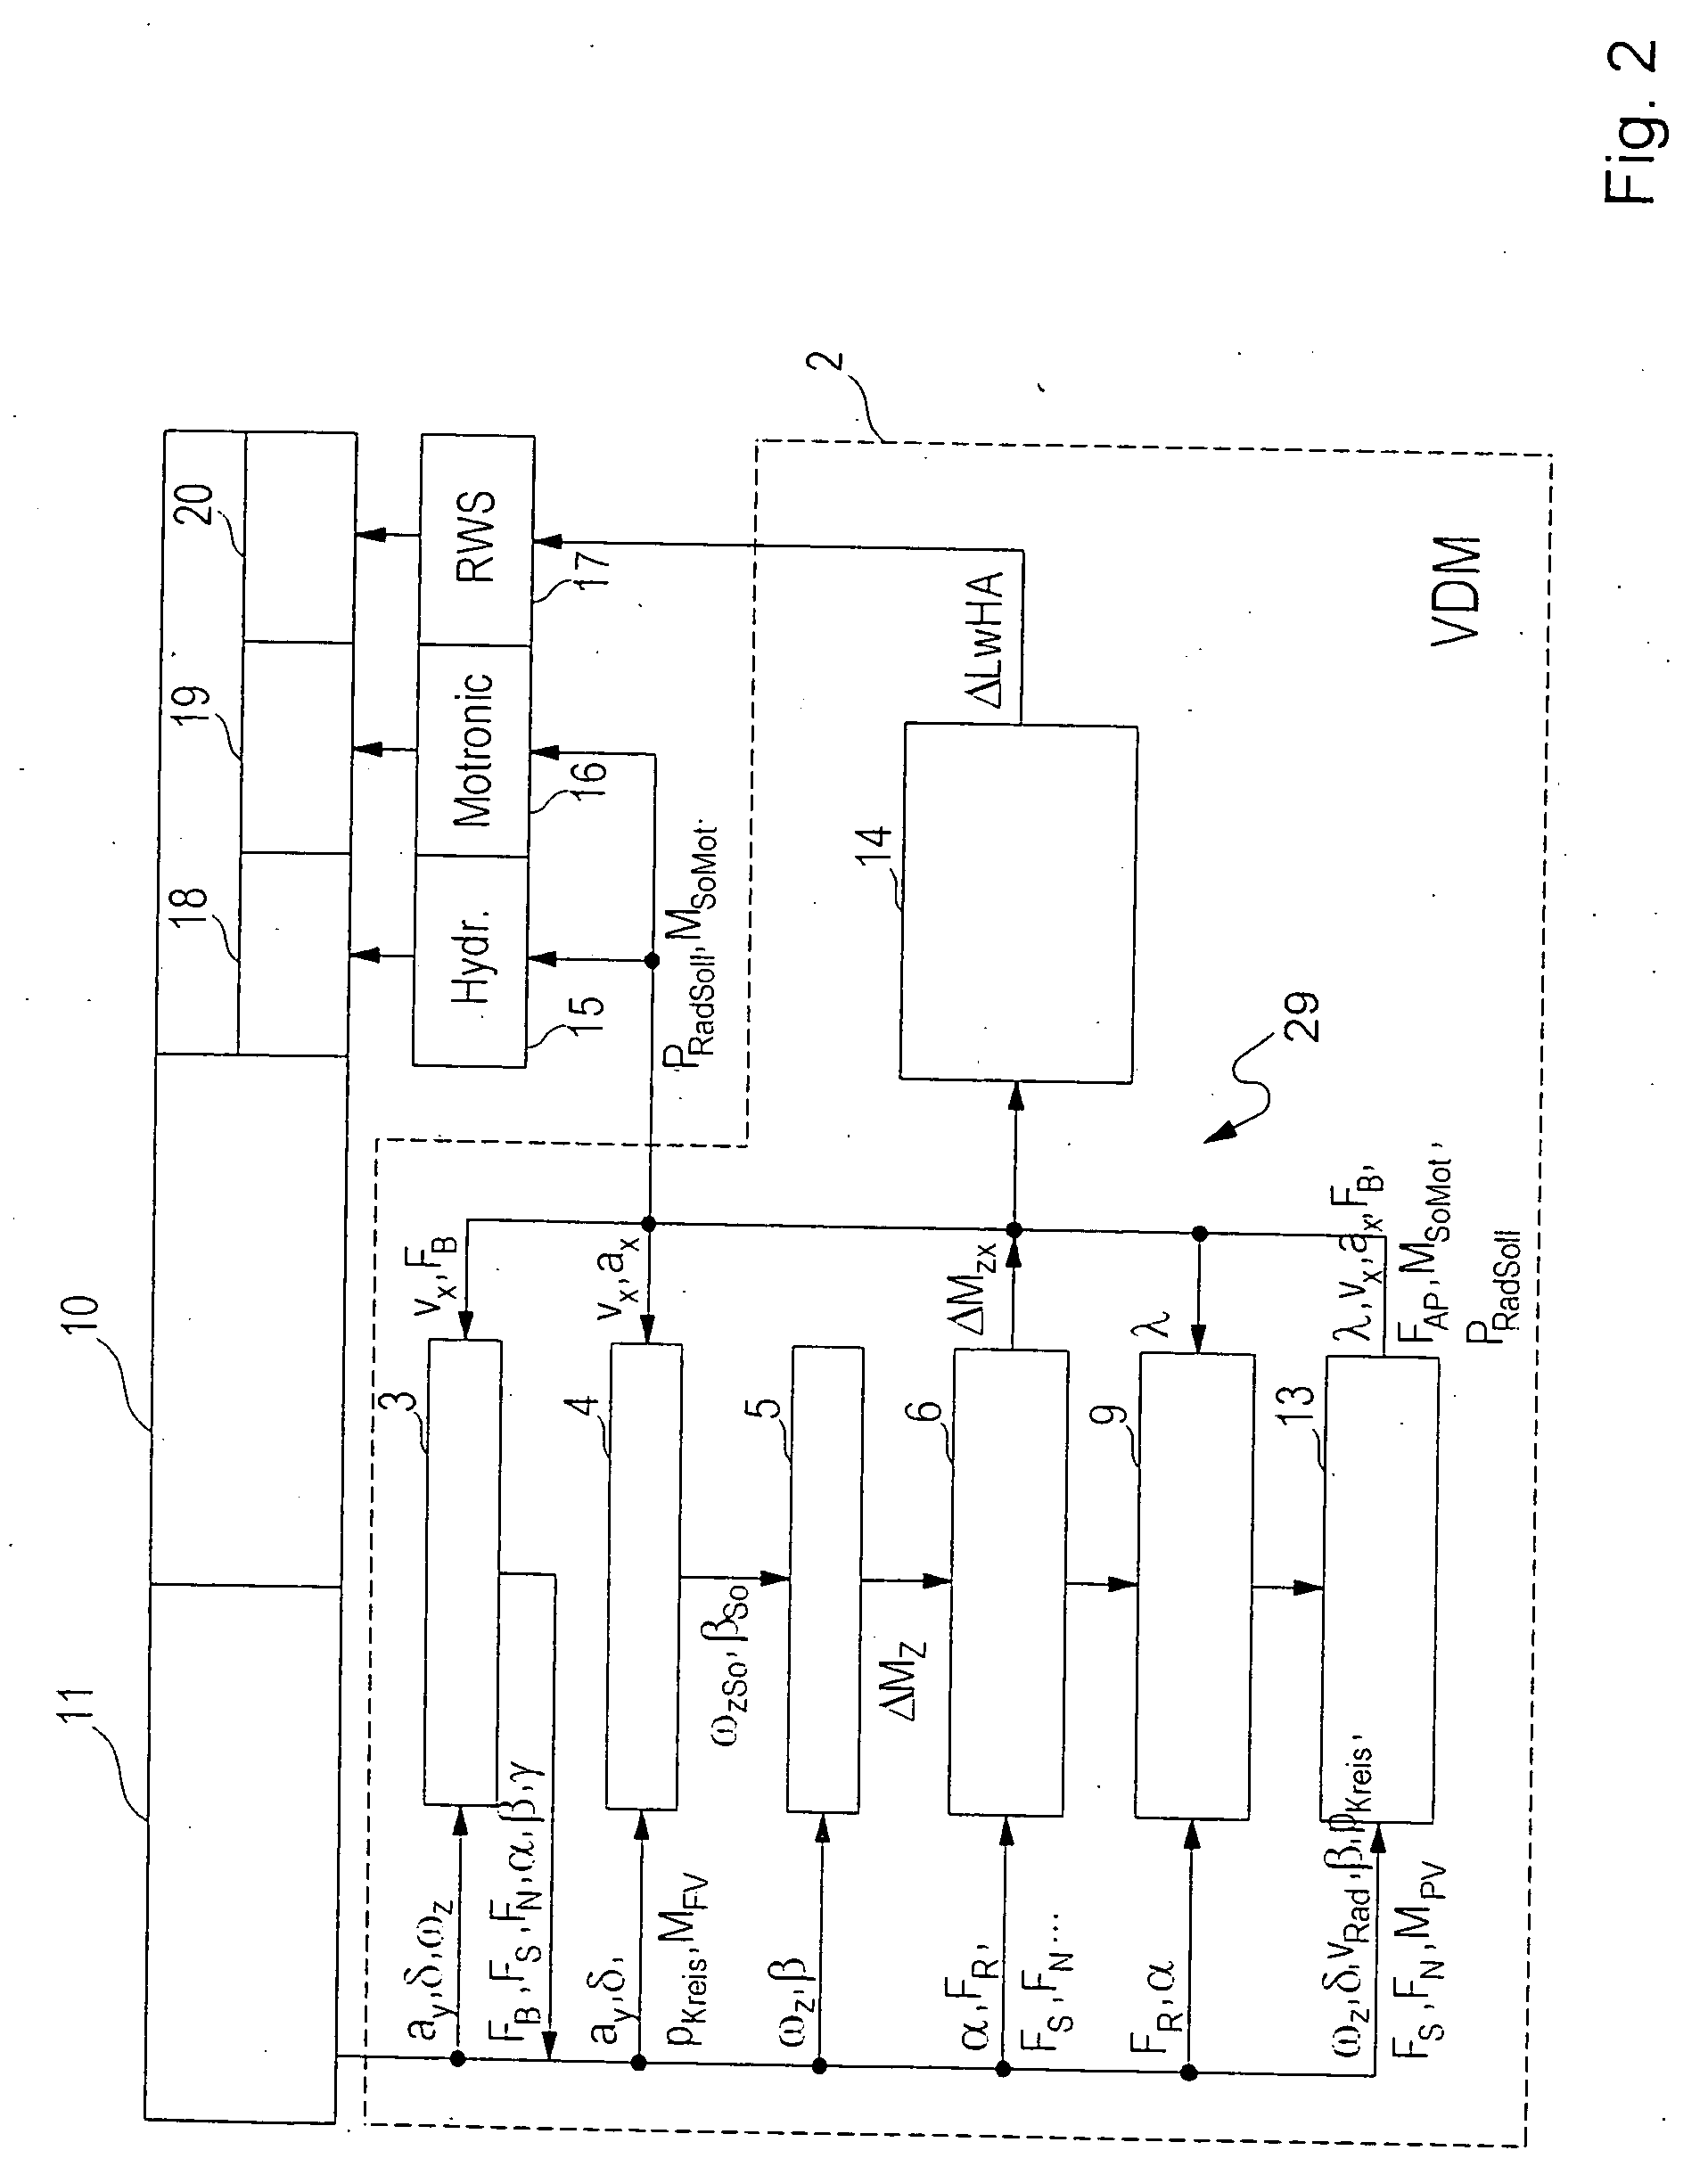 Coordination of a vehicle dynamics control system with a rear-wheel steering system